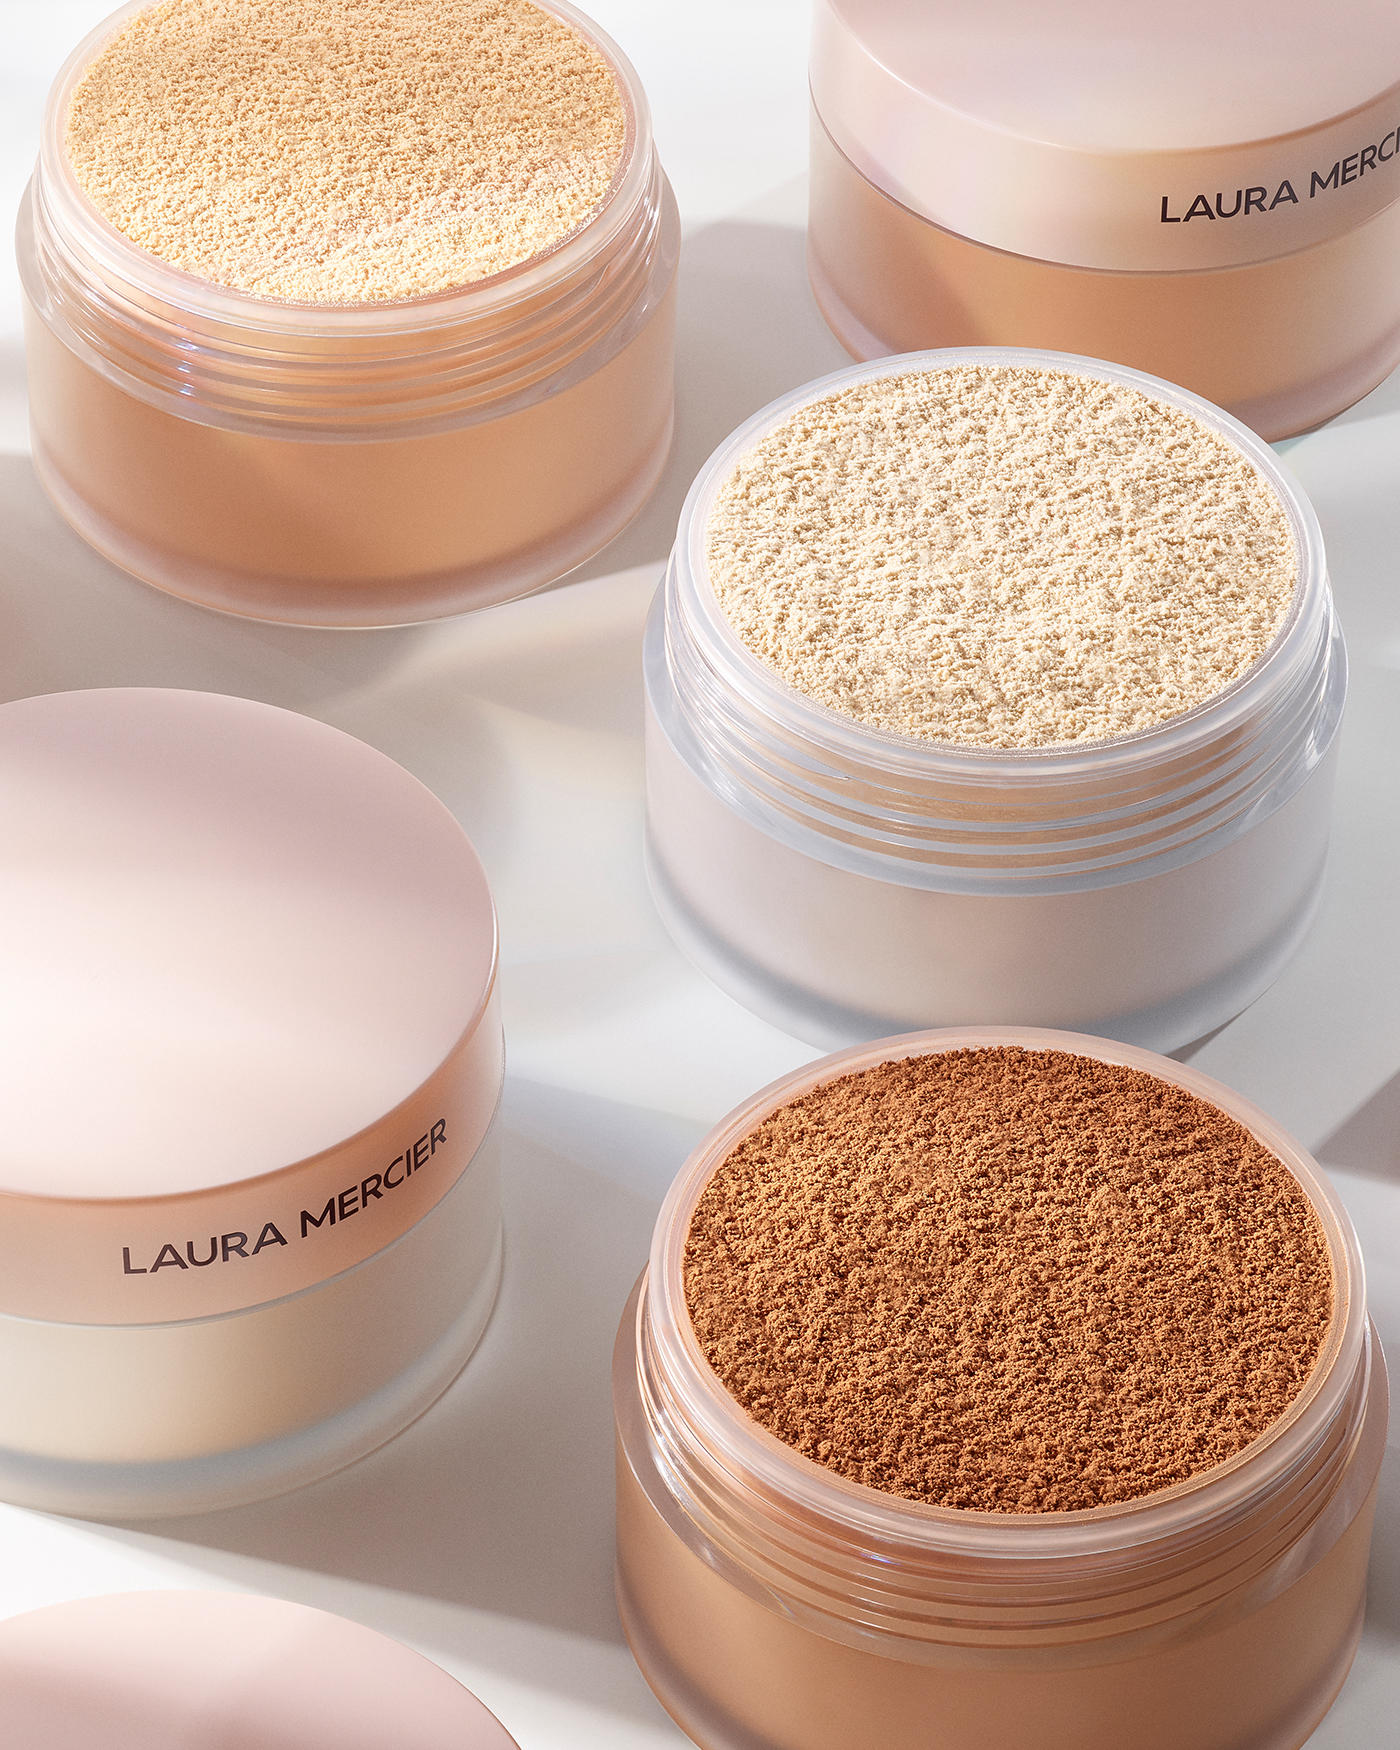 Laura Mercier - Our newest cult-fave Ultra-Blur Setting Powder is going across the pond